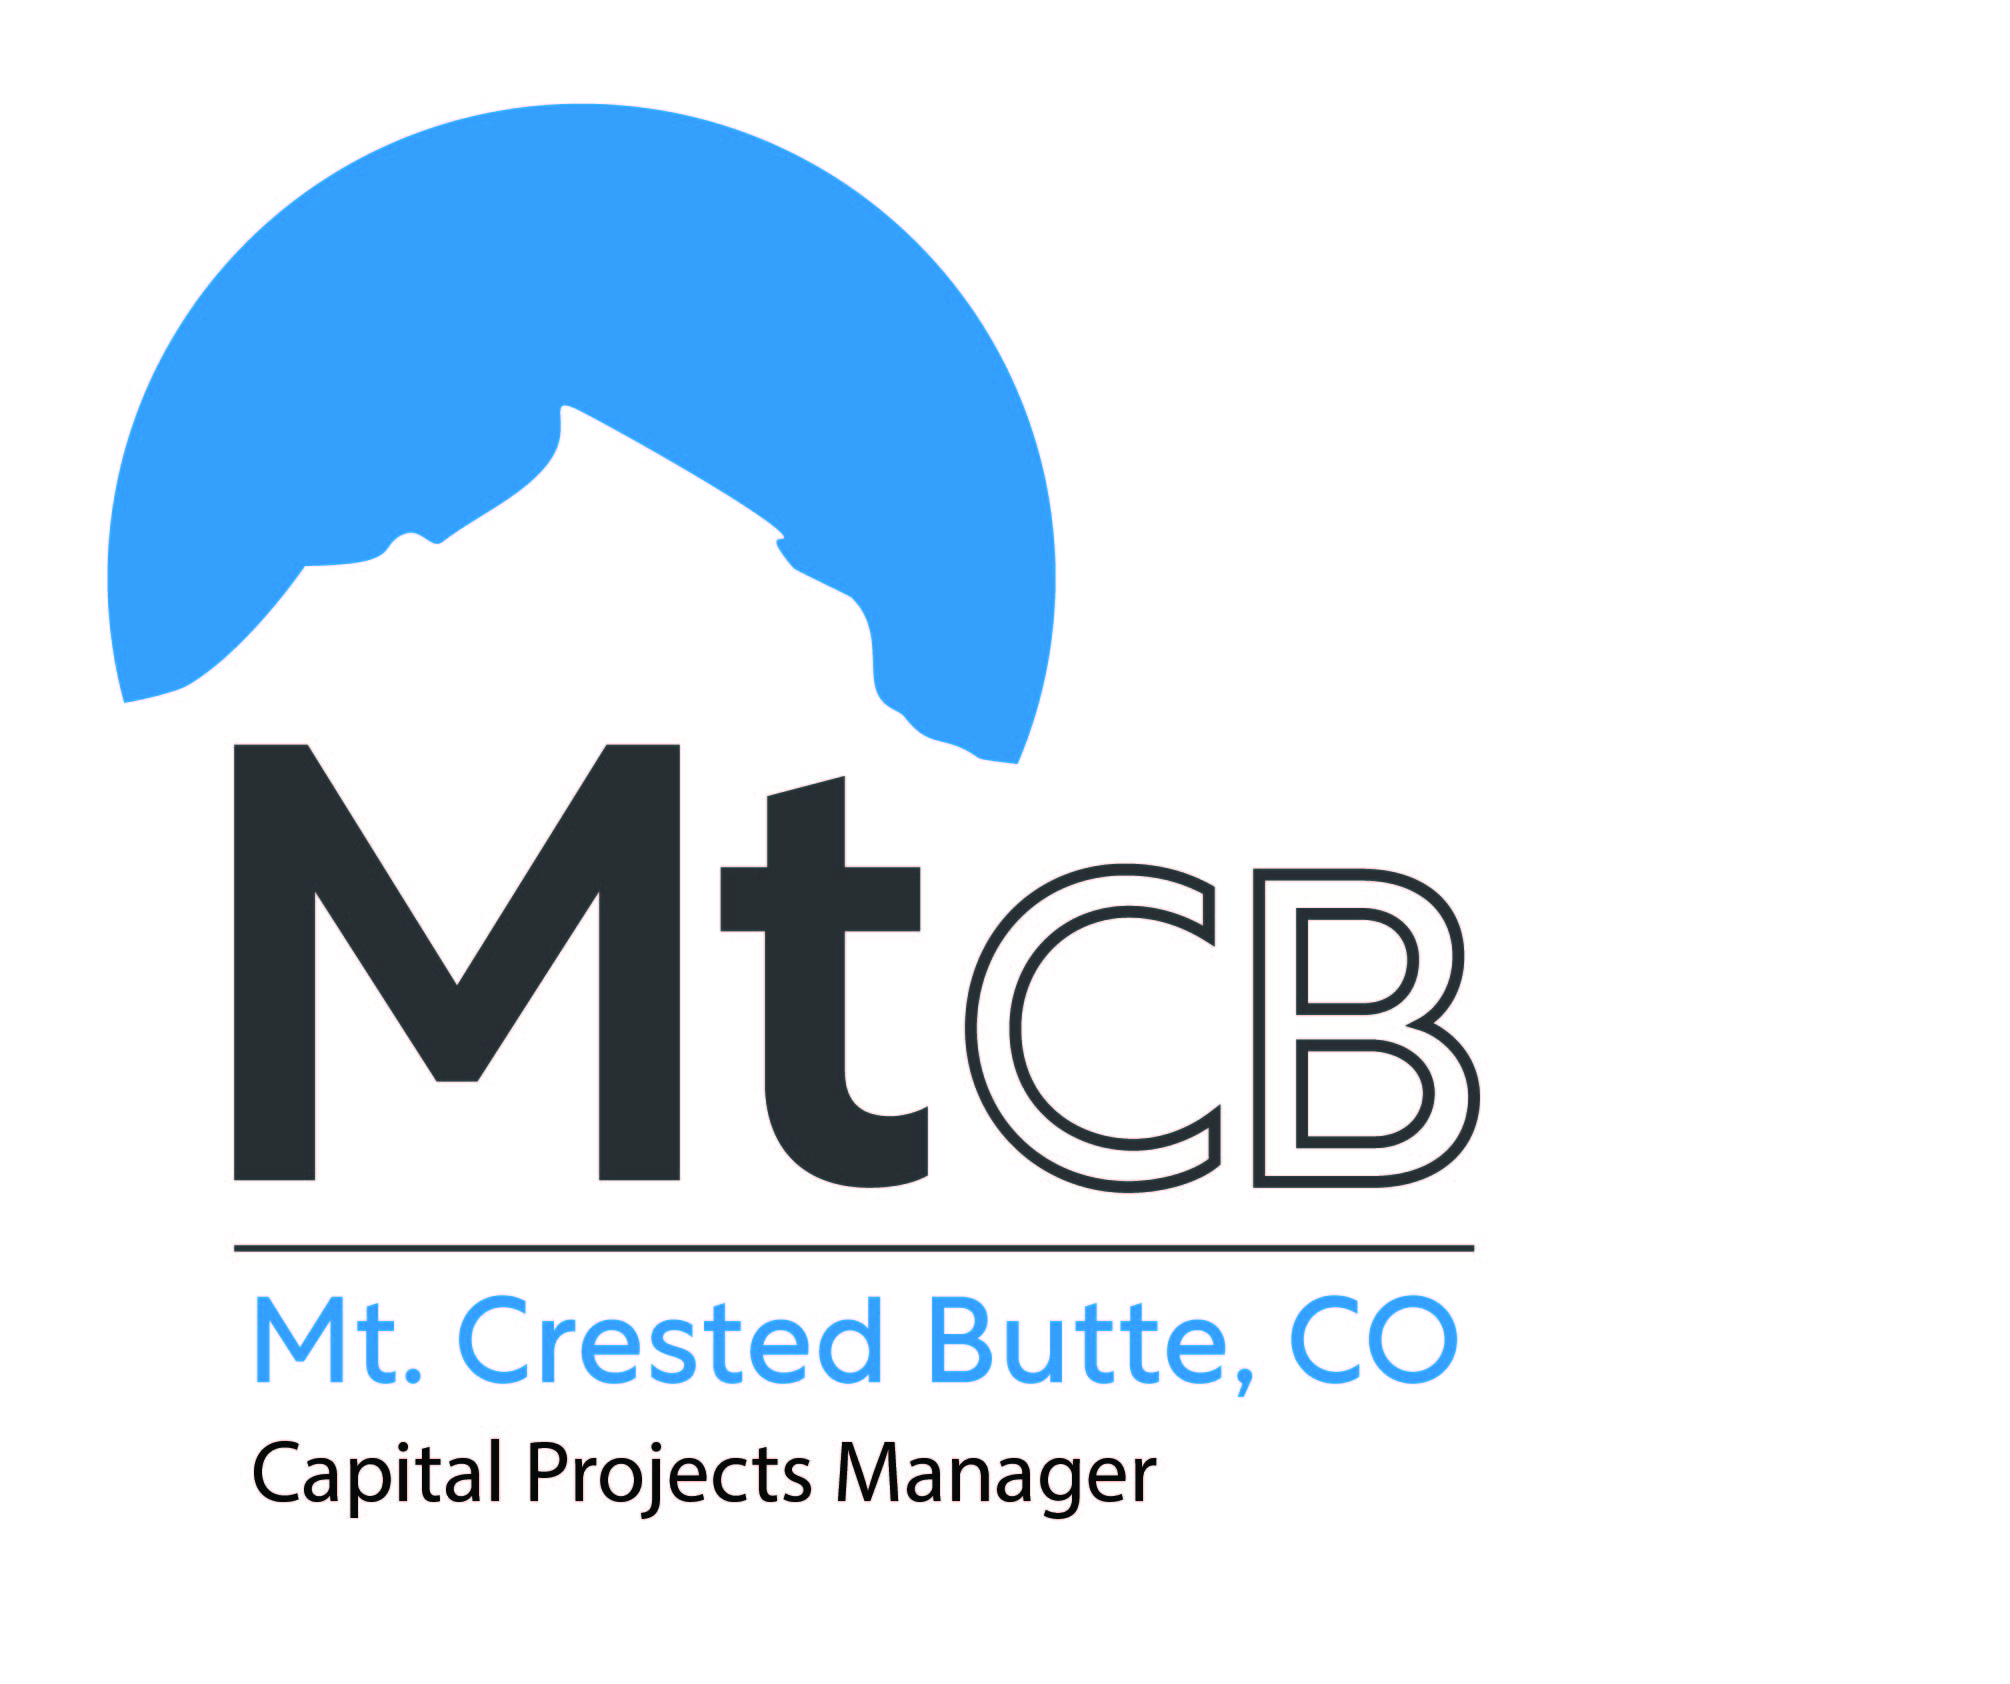 Organization logo of Town of MT. Crested Butte